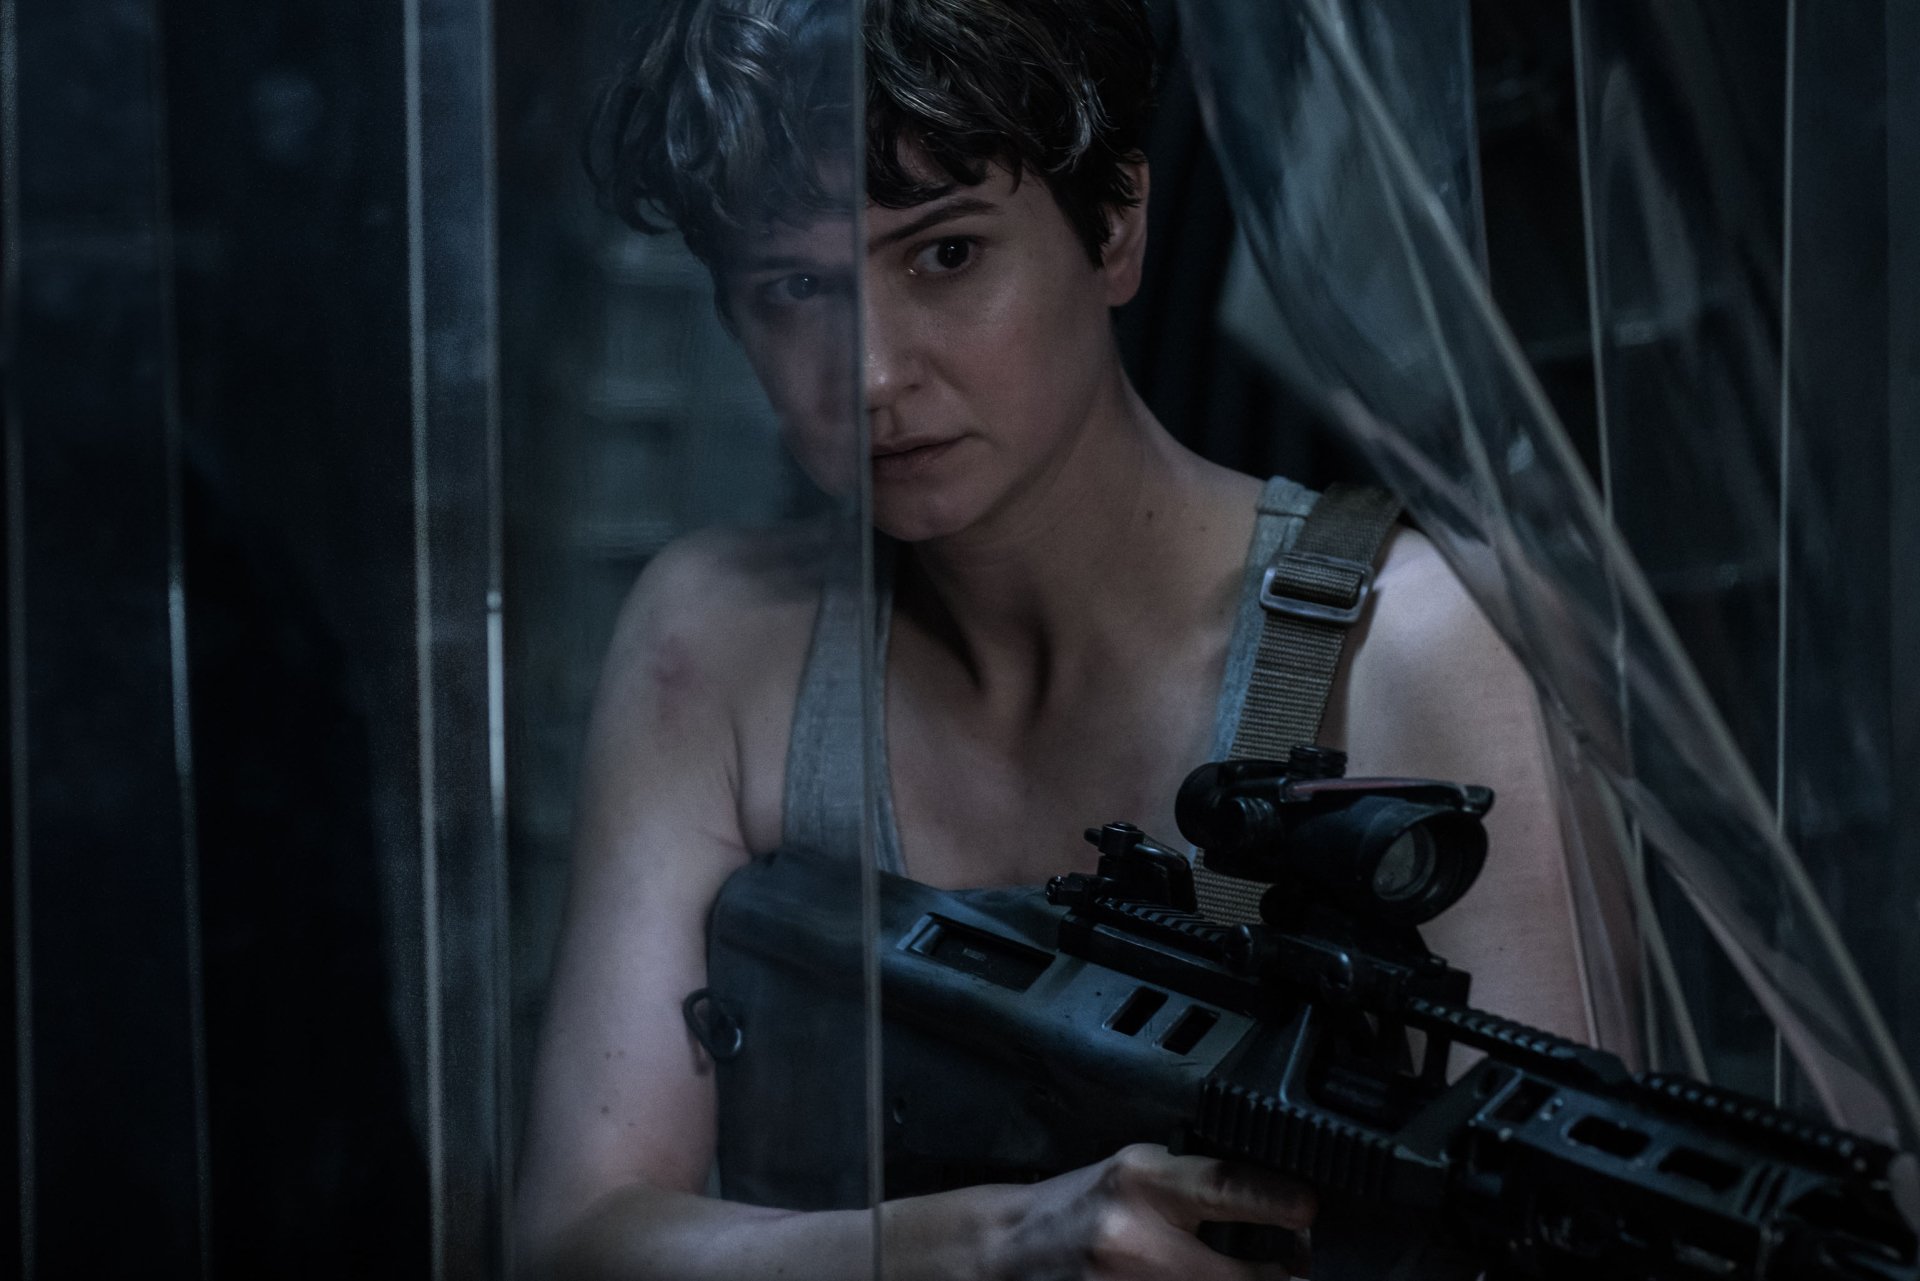 People 1920x1281 movies science fiction horror science fiction women Alien: Covenant weapon girls with guns actress film stills Katherine Waterston women